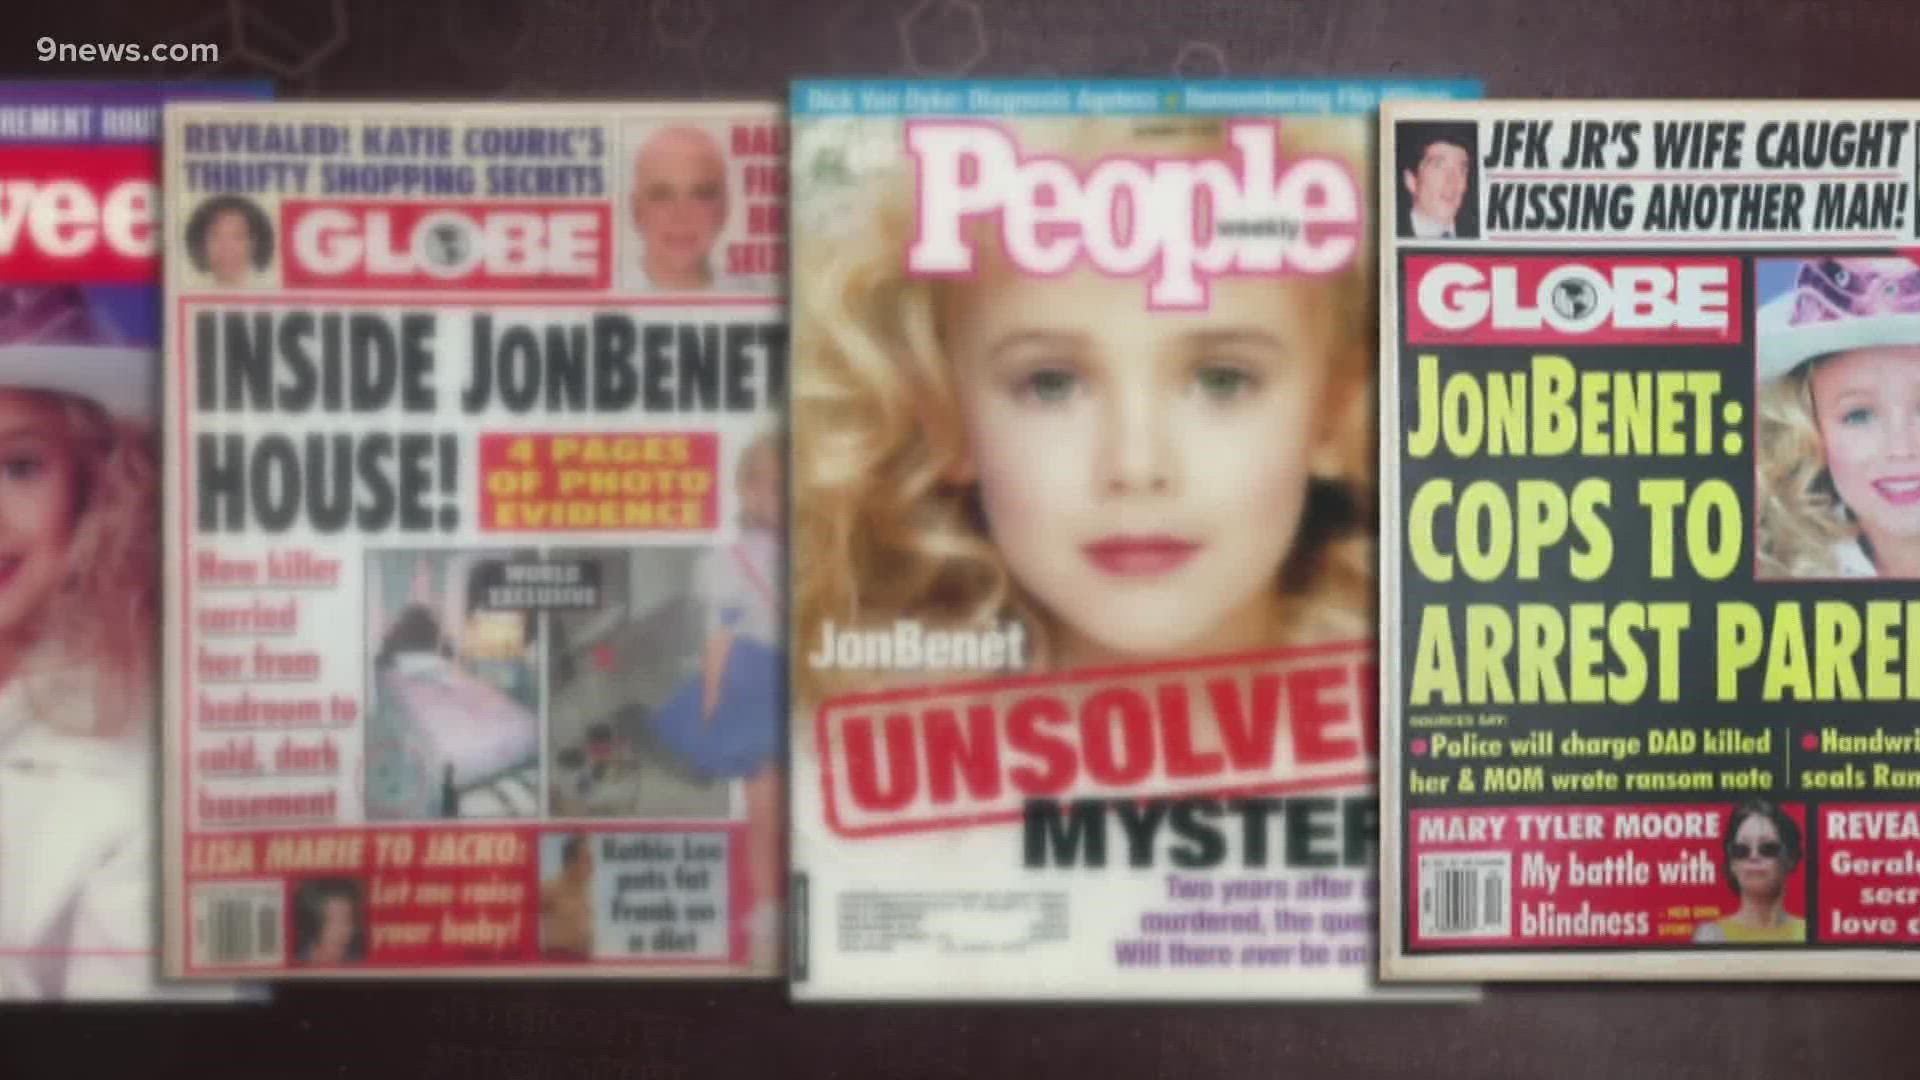 The former 9NEWS investigative reporter covered the murder of JonBenet Ramsey in 1996 and has written two books on the case.